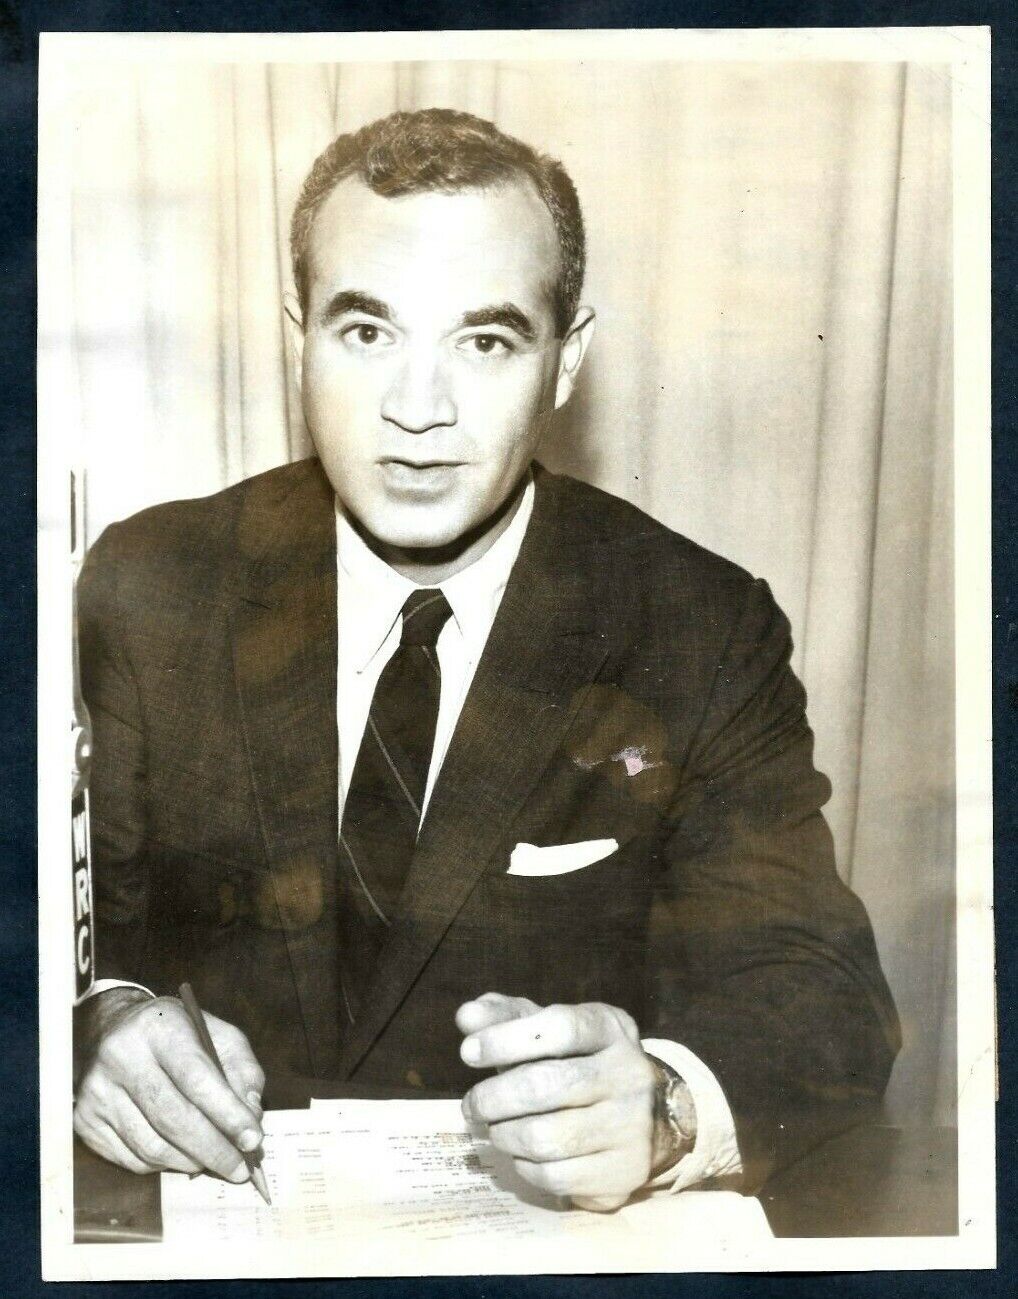 FAMOUS NBC NEWS COMMENTATOR & JOURNALIST MARTIN AGRONSKY 1957 PRESS Photo Y 207